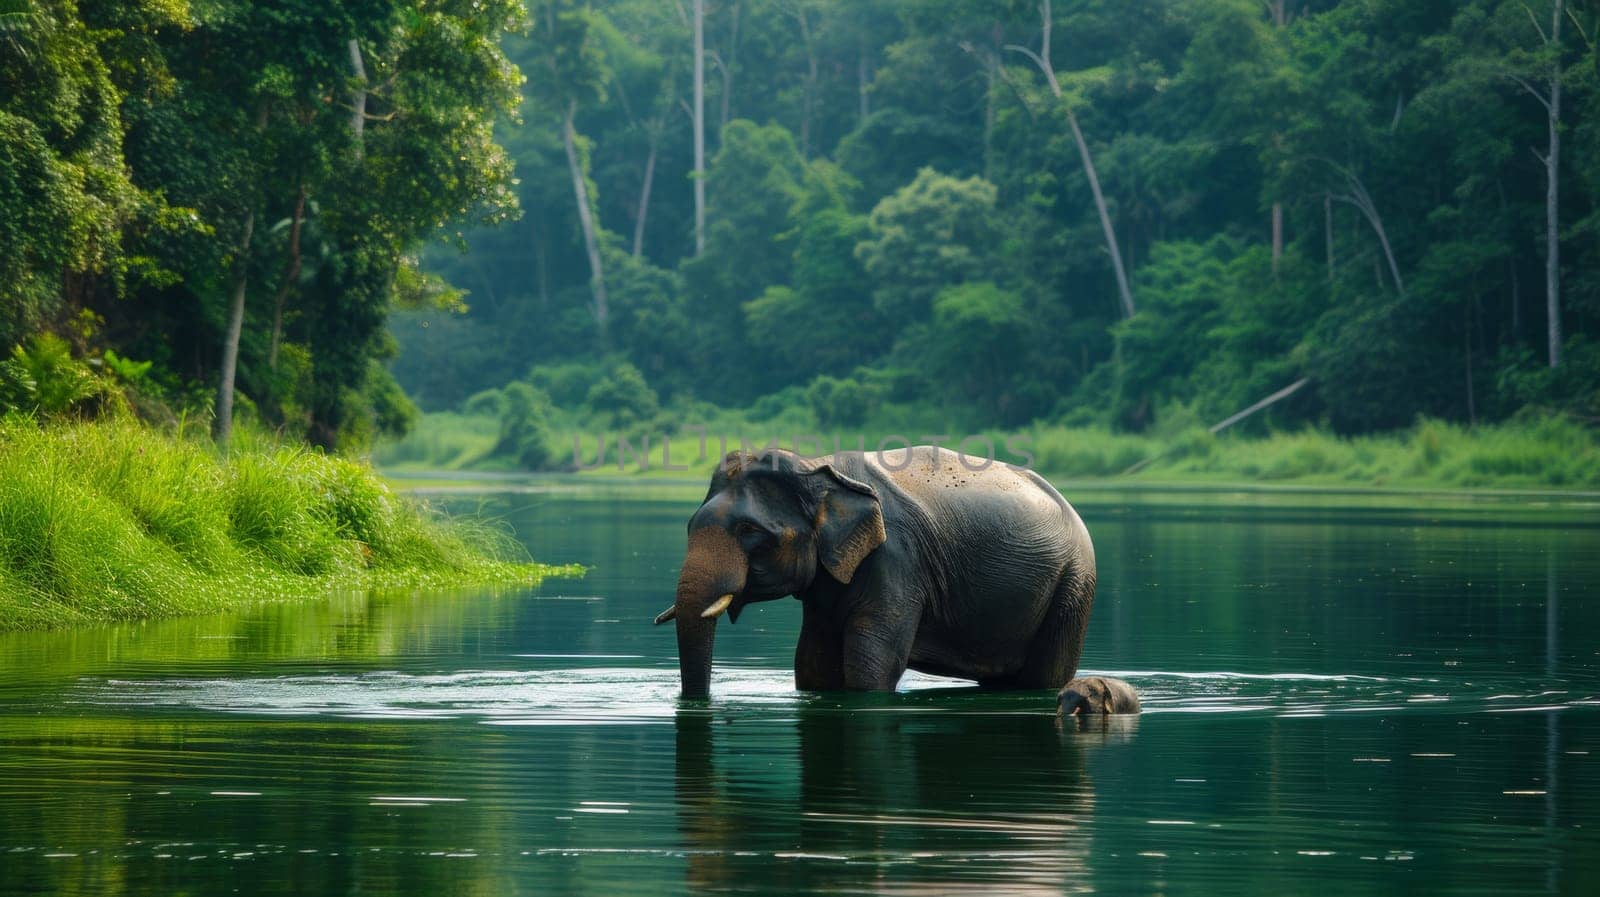 An elephant and calf in a river with lush green trees, AI by starush